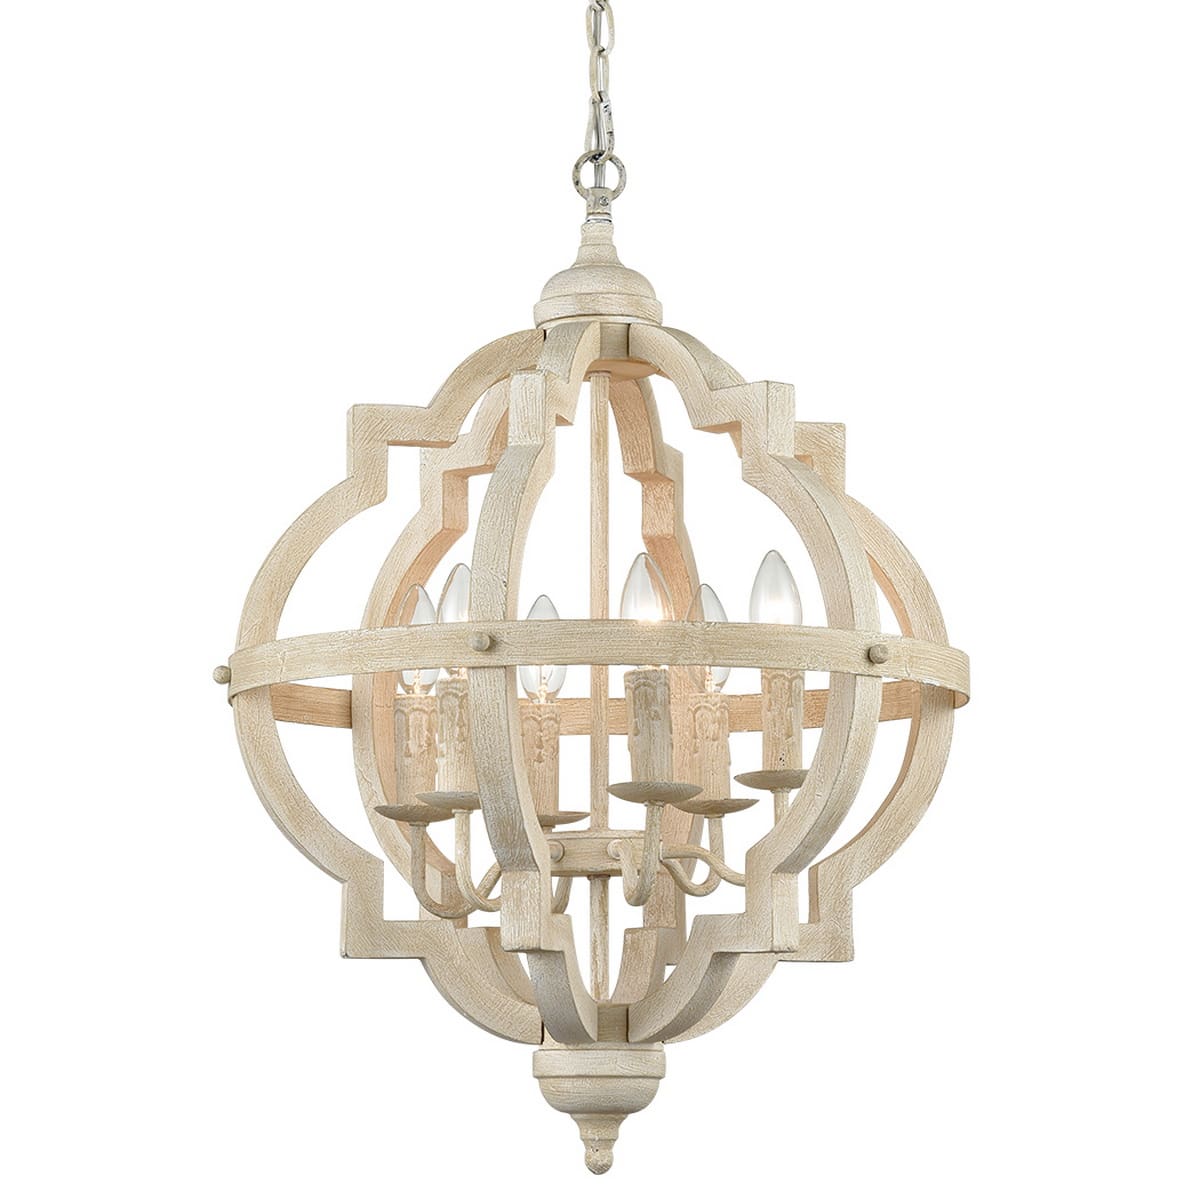 Distressed Off-white Wooden Chandelier Sphere 6 Light